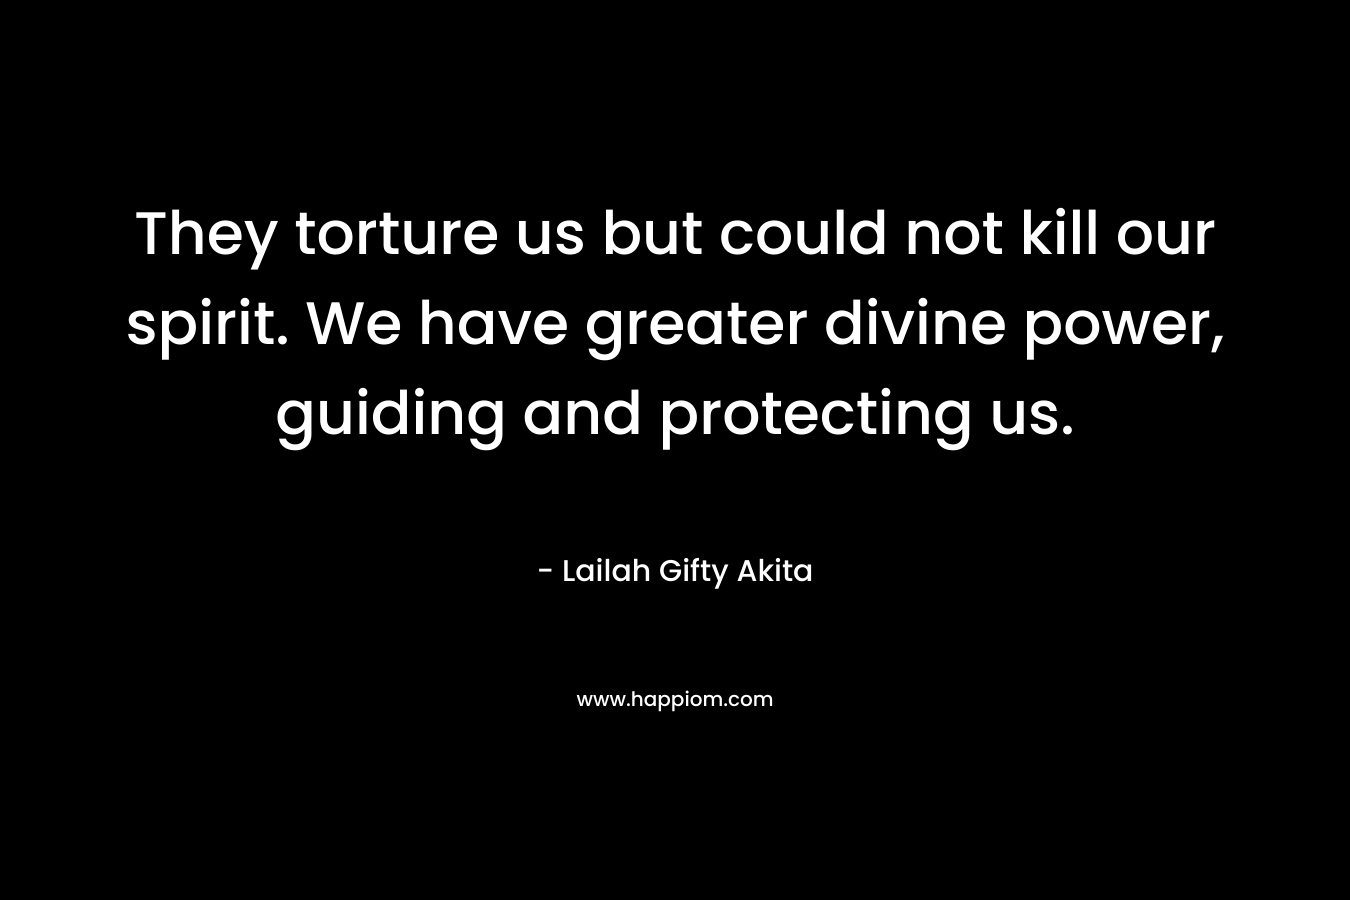 They torture us but could not kill our spirit. We have greater divine power, guiding and protecting us.